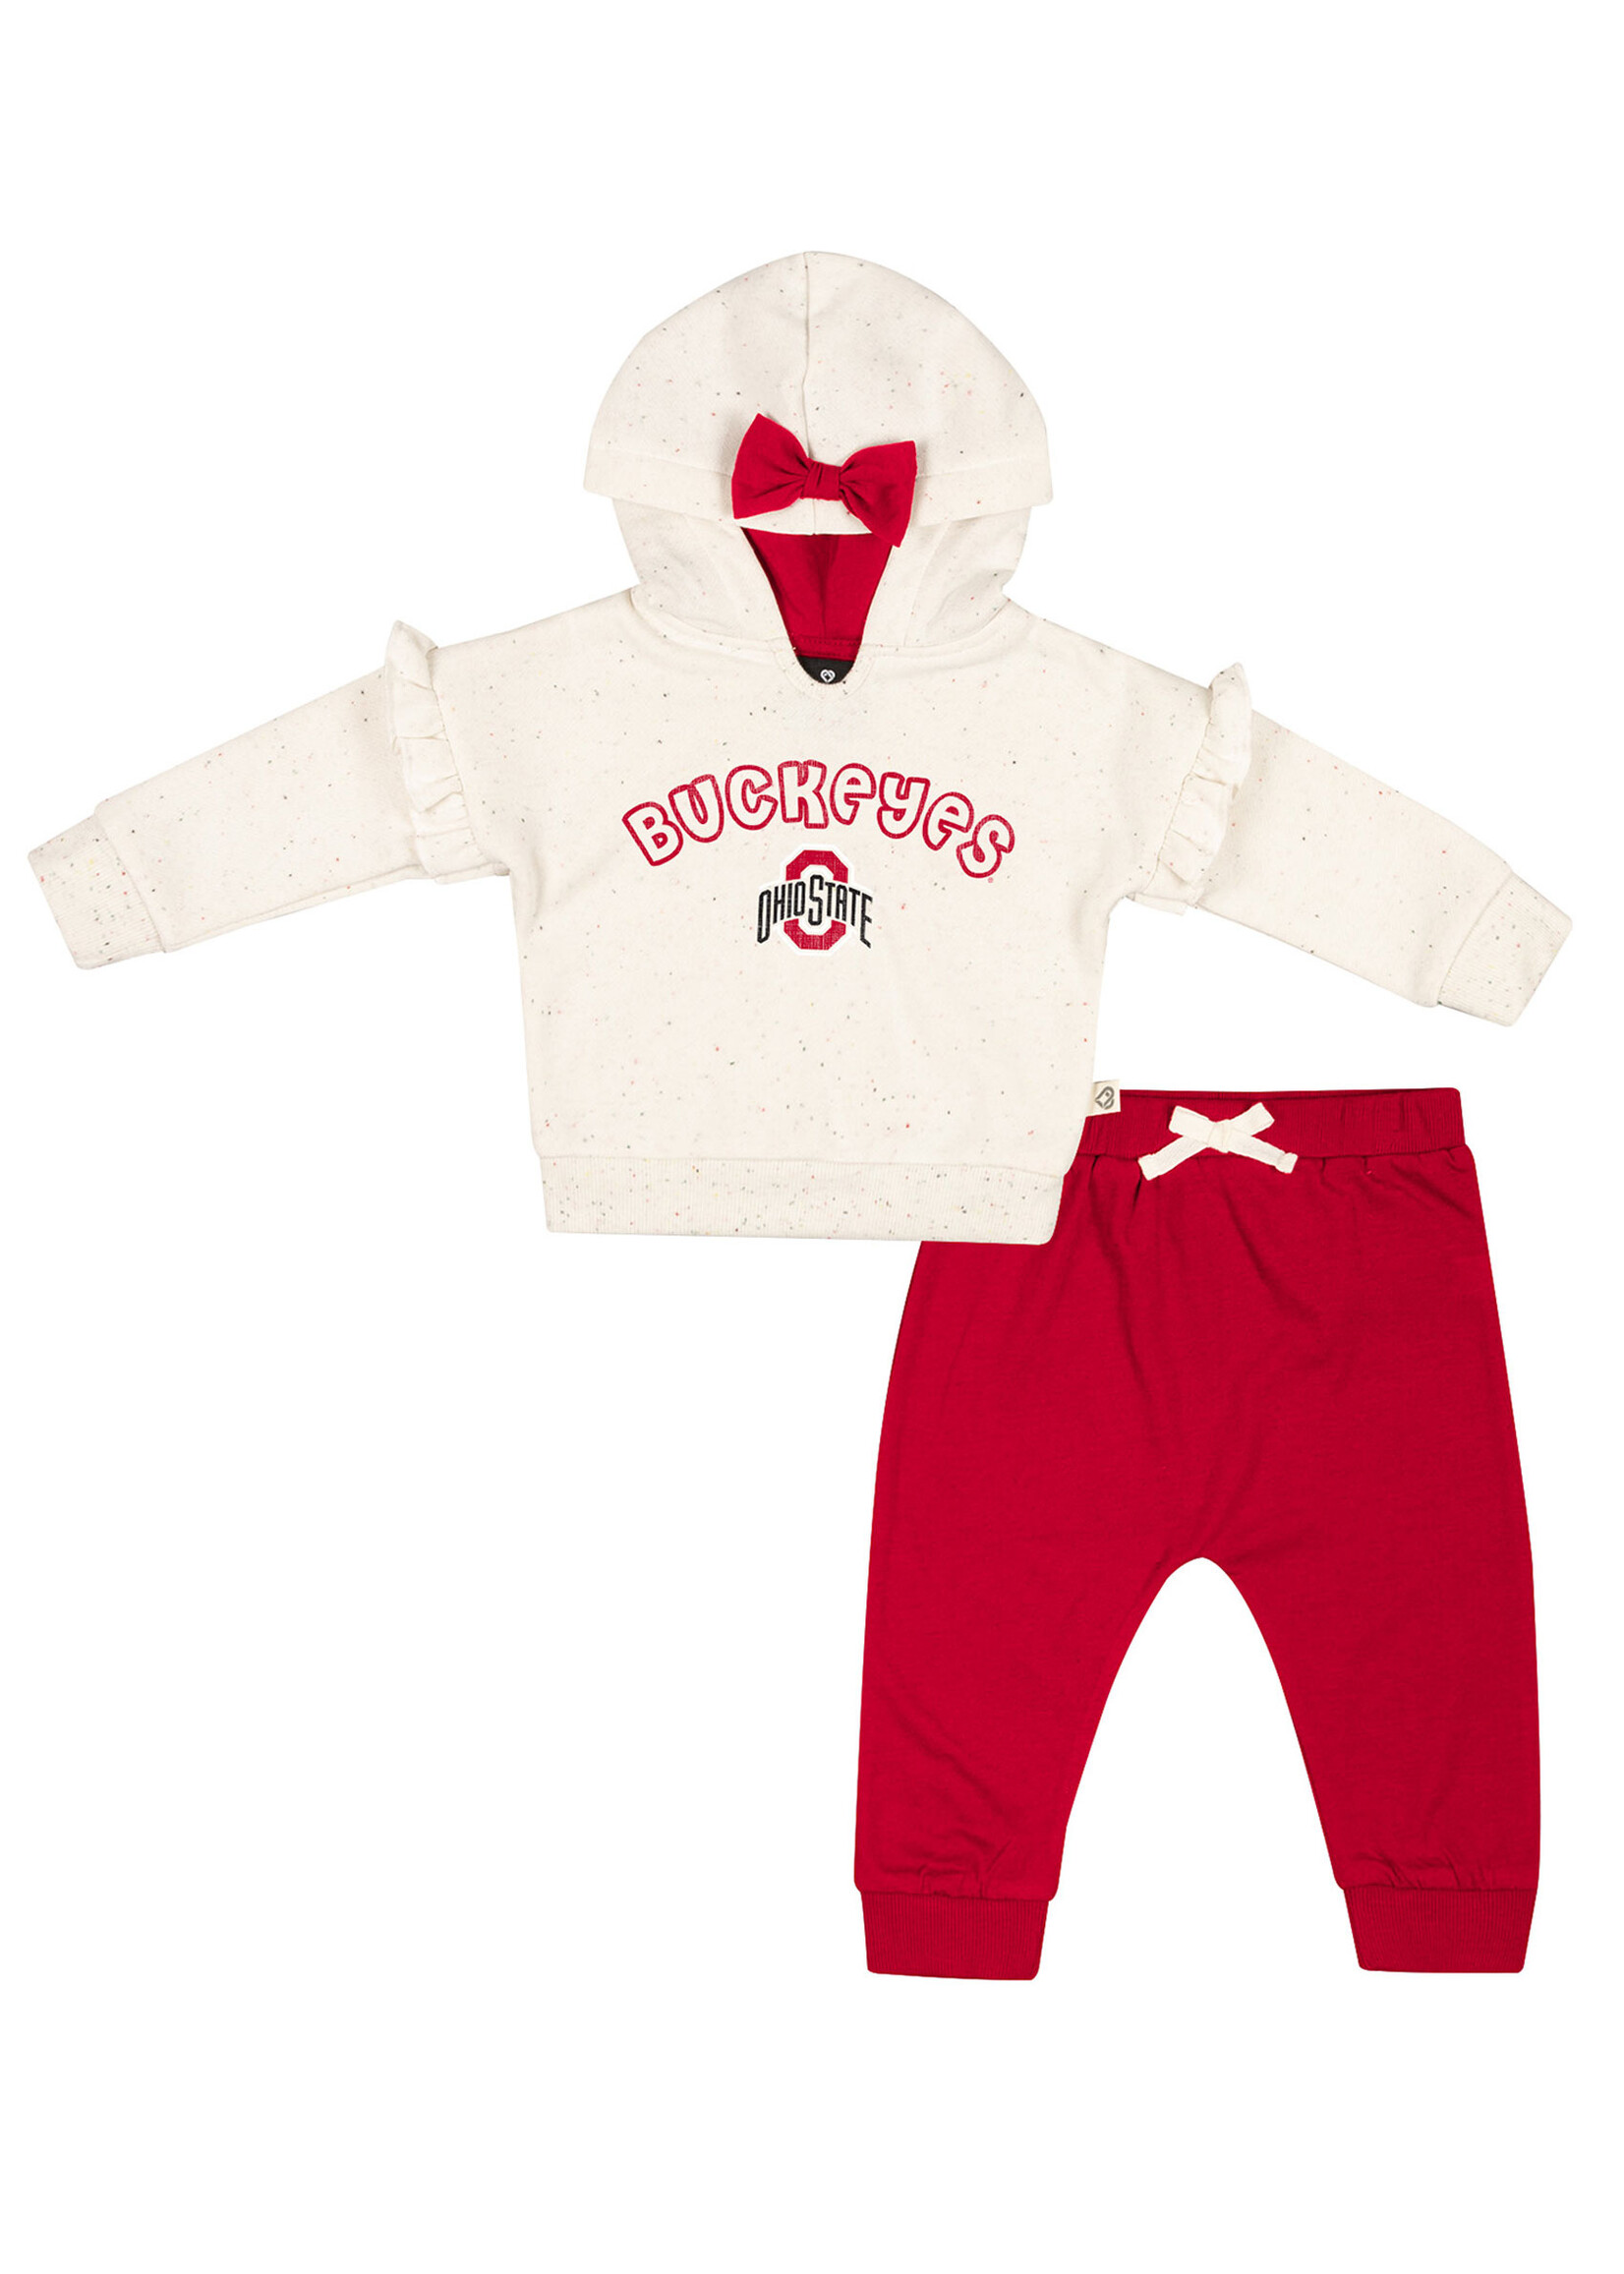 Colosseum Athletics Ohio State Buckeyes Infant Wrapped in a Bow Outfit